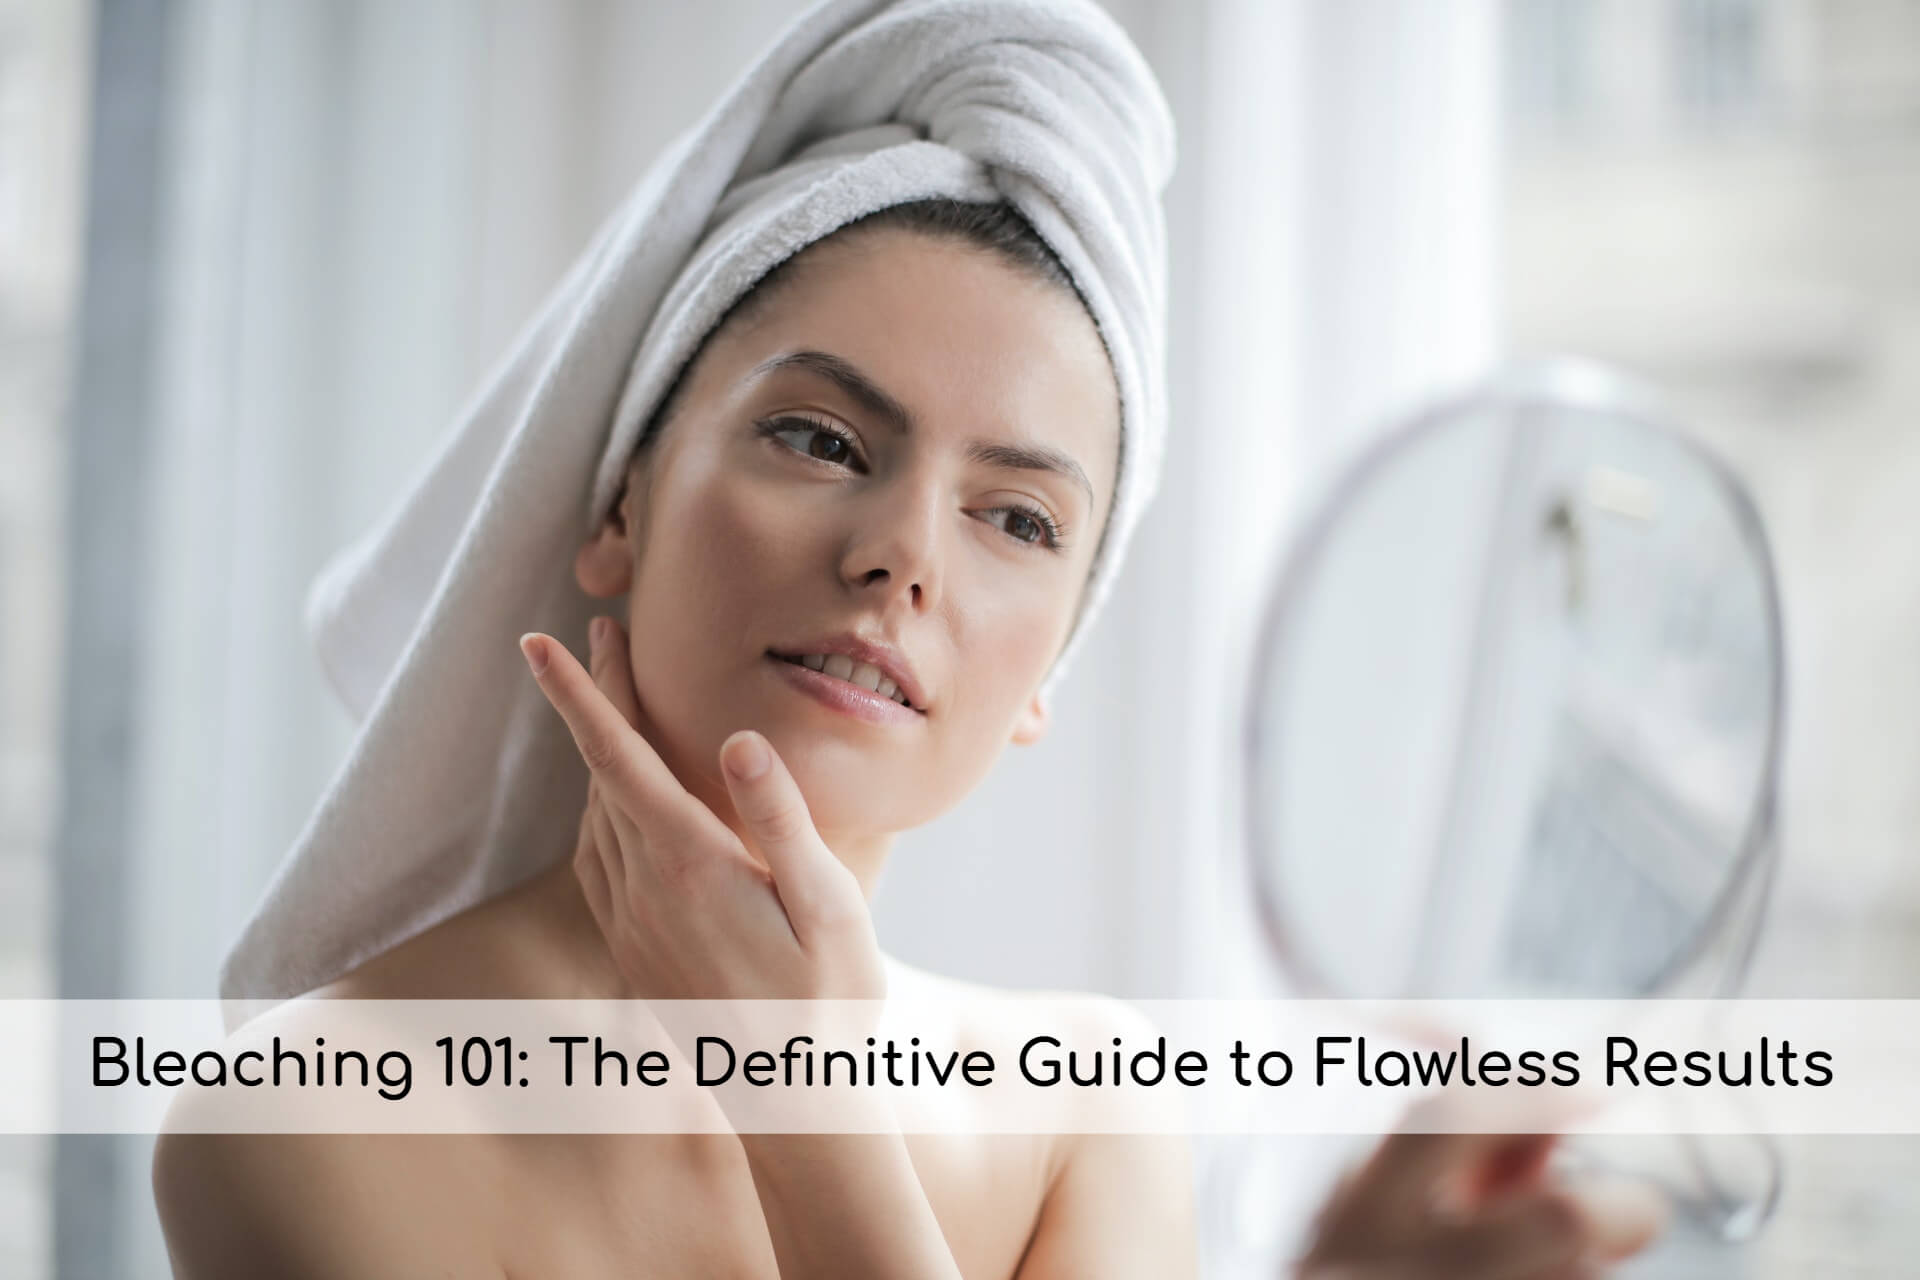 Bleaching 101: The Definitive Guide to Flawless Results